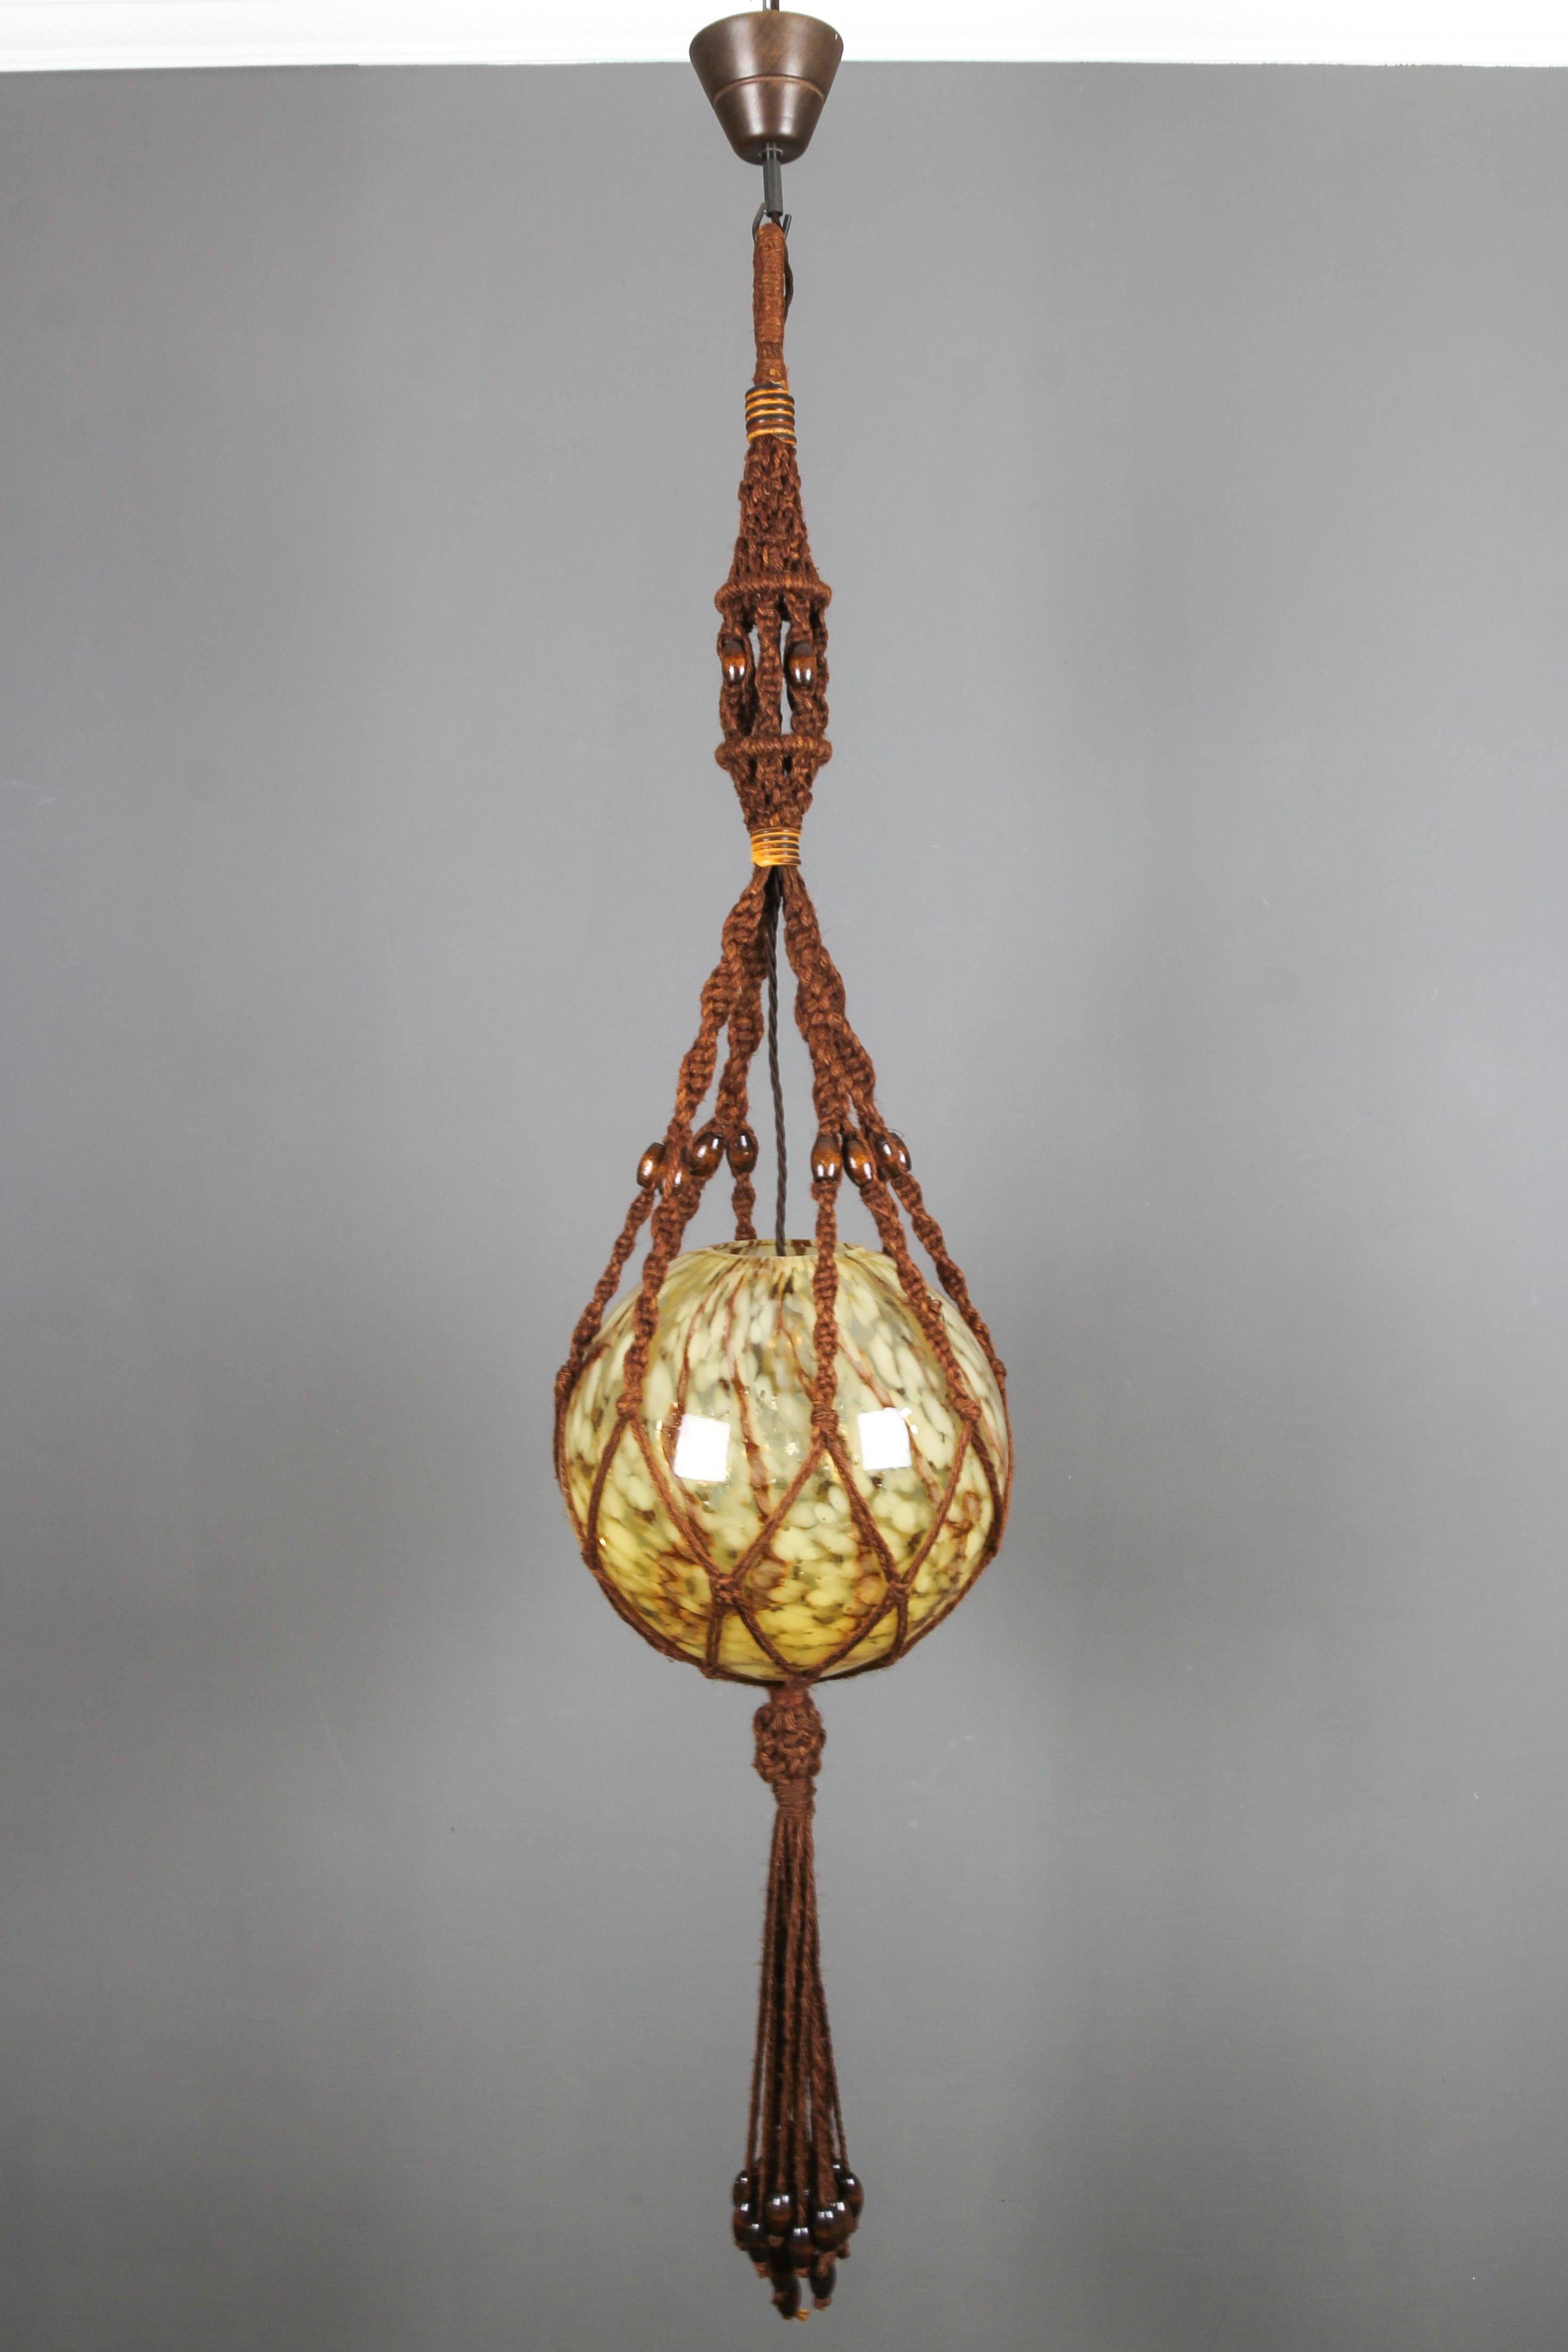 Unique hand-crafted vintage pendant light fixture from circa the 1970s. This unusual braided pendant lamp is handmade of brown sisal/jute and decorated with wooden beads; a brown and beige marbled glass globe lampshade is in the center of the light